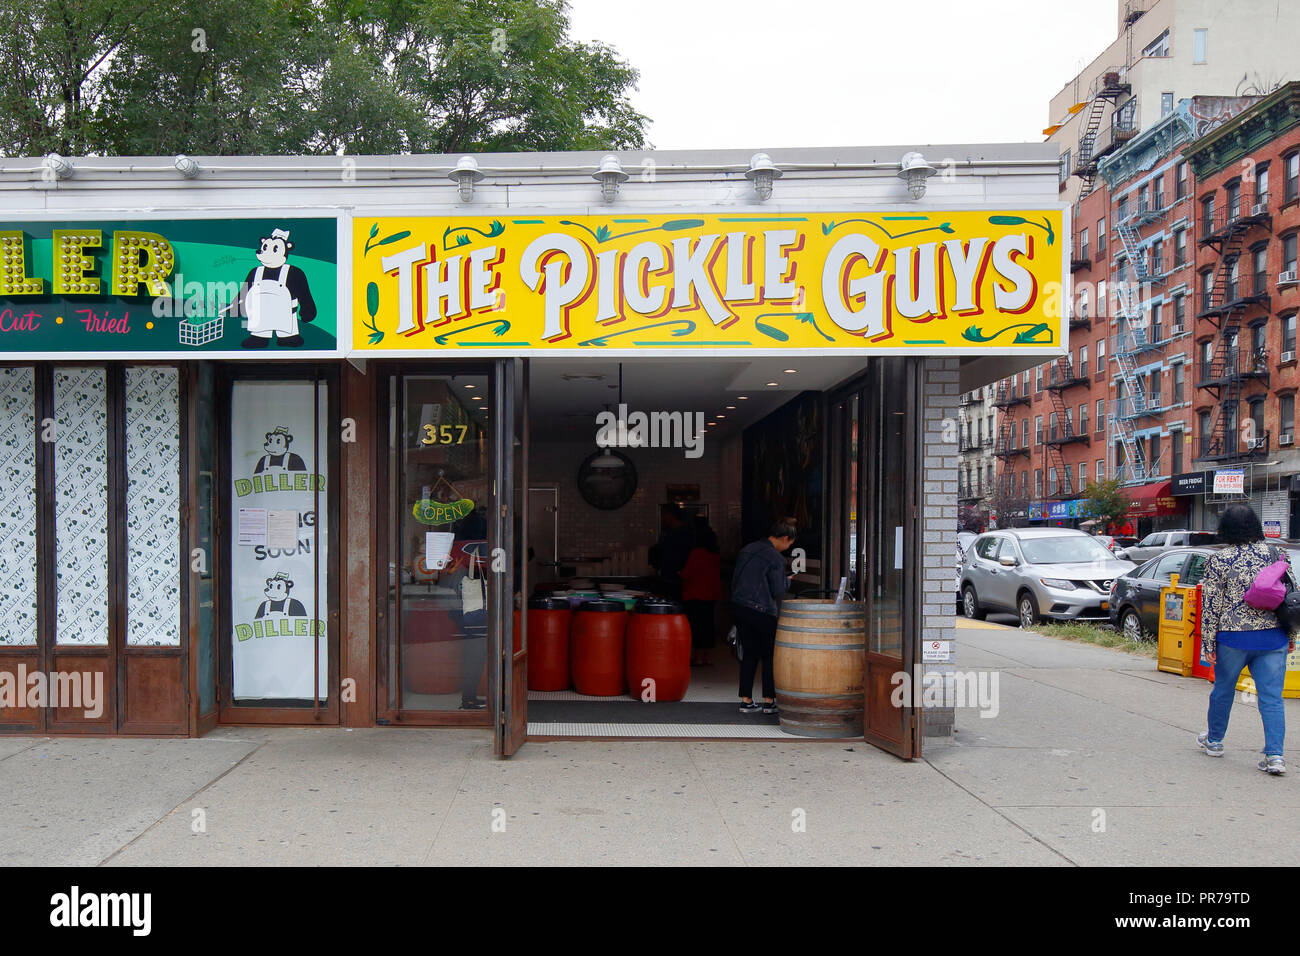 Mike The Pickle Guy Featured in The Daily News - Picture of The Pickle Guys,  New York City - Tripadvisor